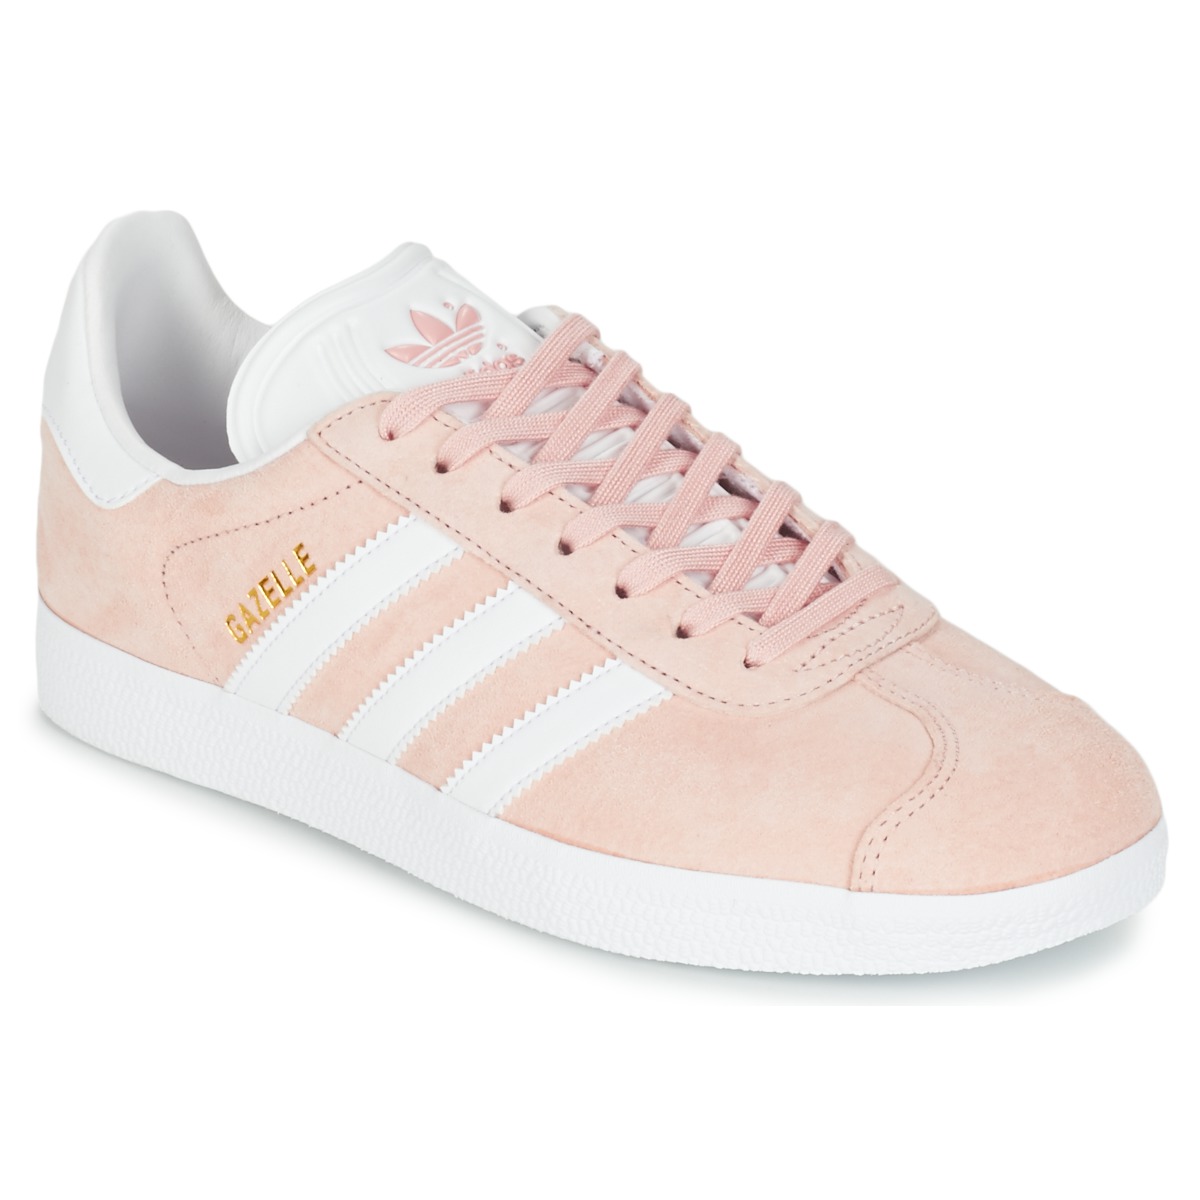 adidas Originals GAZELLE Pink - Free delivery | Spartoo UK ! - Shoes Low  top trainers £ 68.40